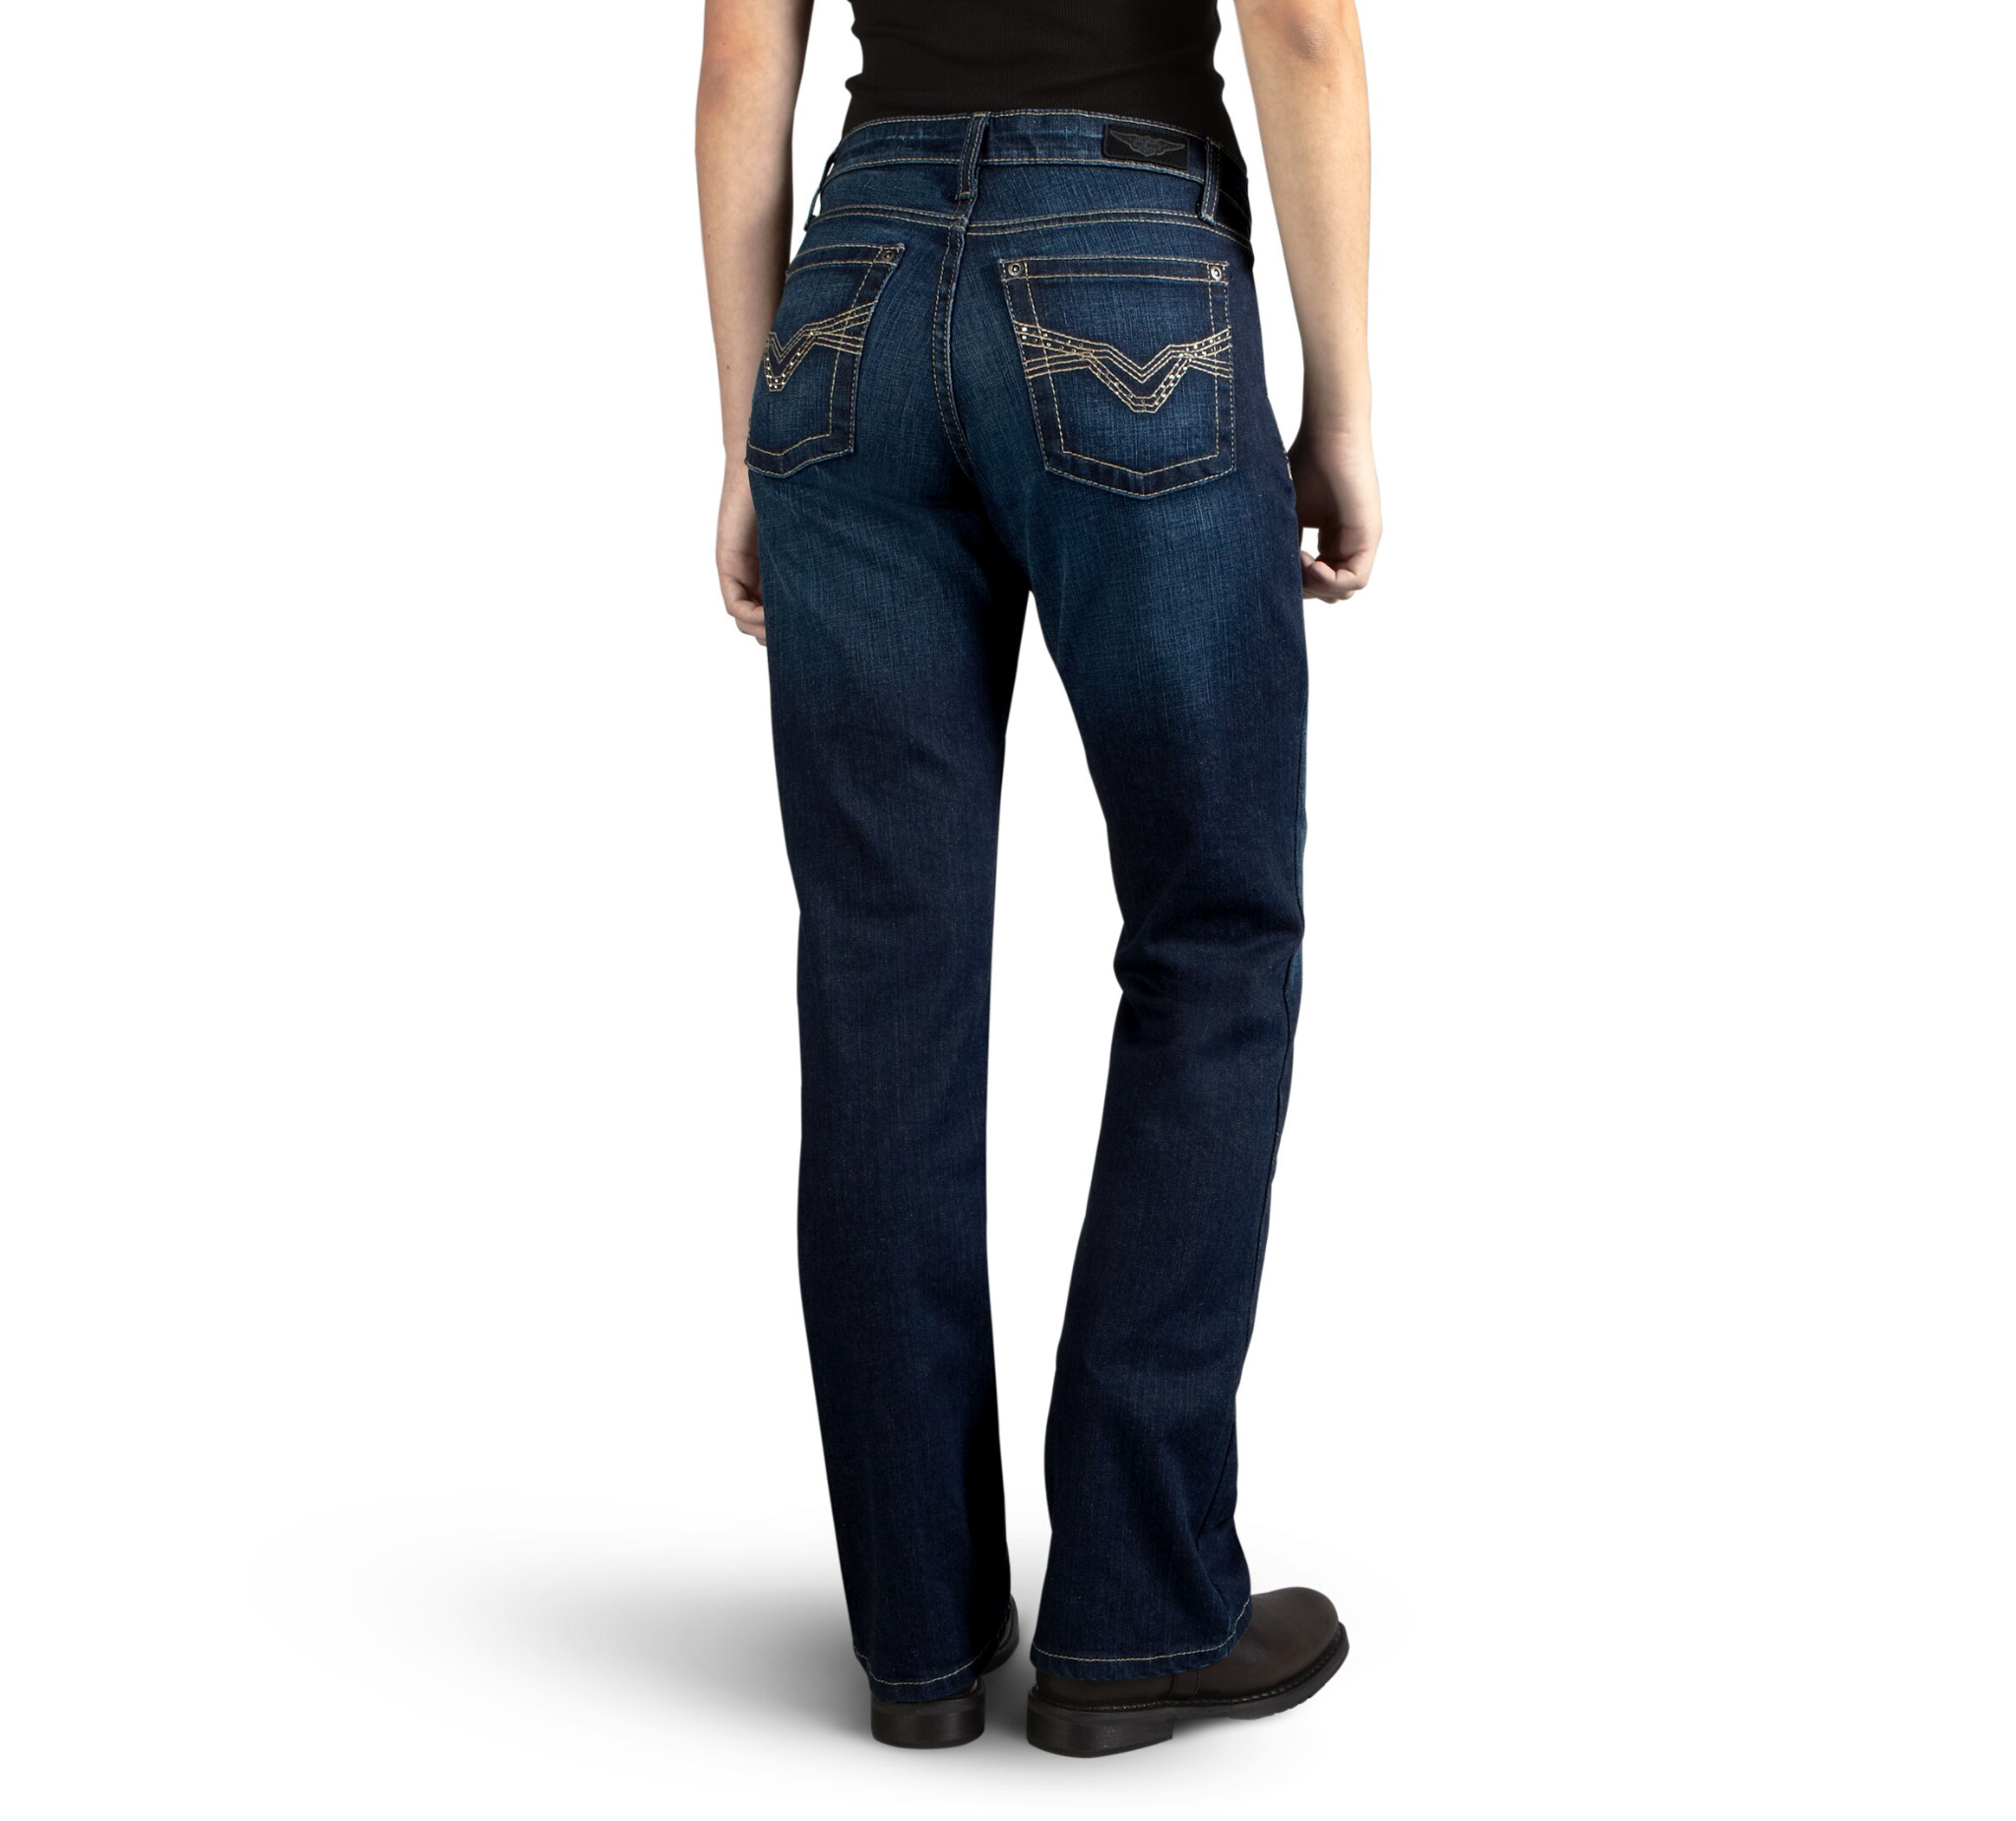 Buy > low rise jeans bootcut womens > in stock